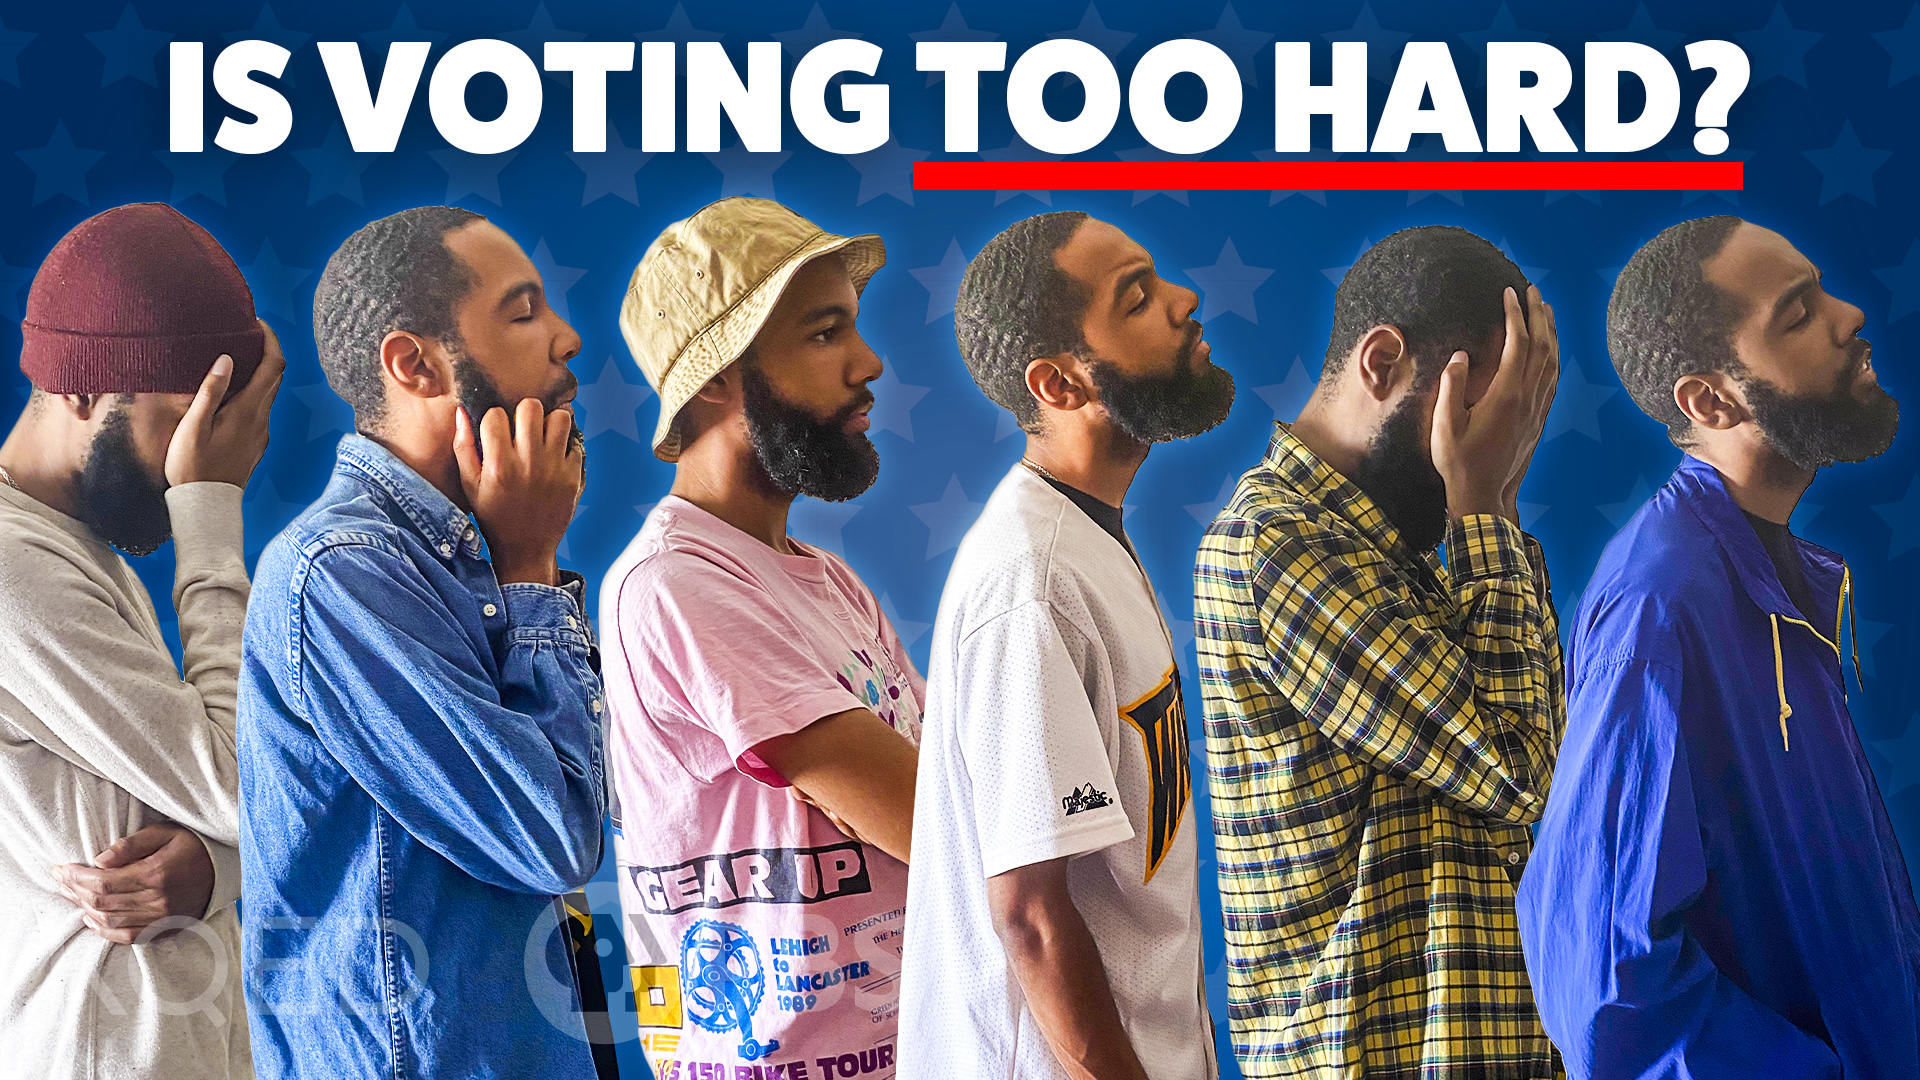 Various images of the same man looking frustrated accompanied by text that reads 'Is Voting Too Hard?'.